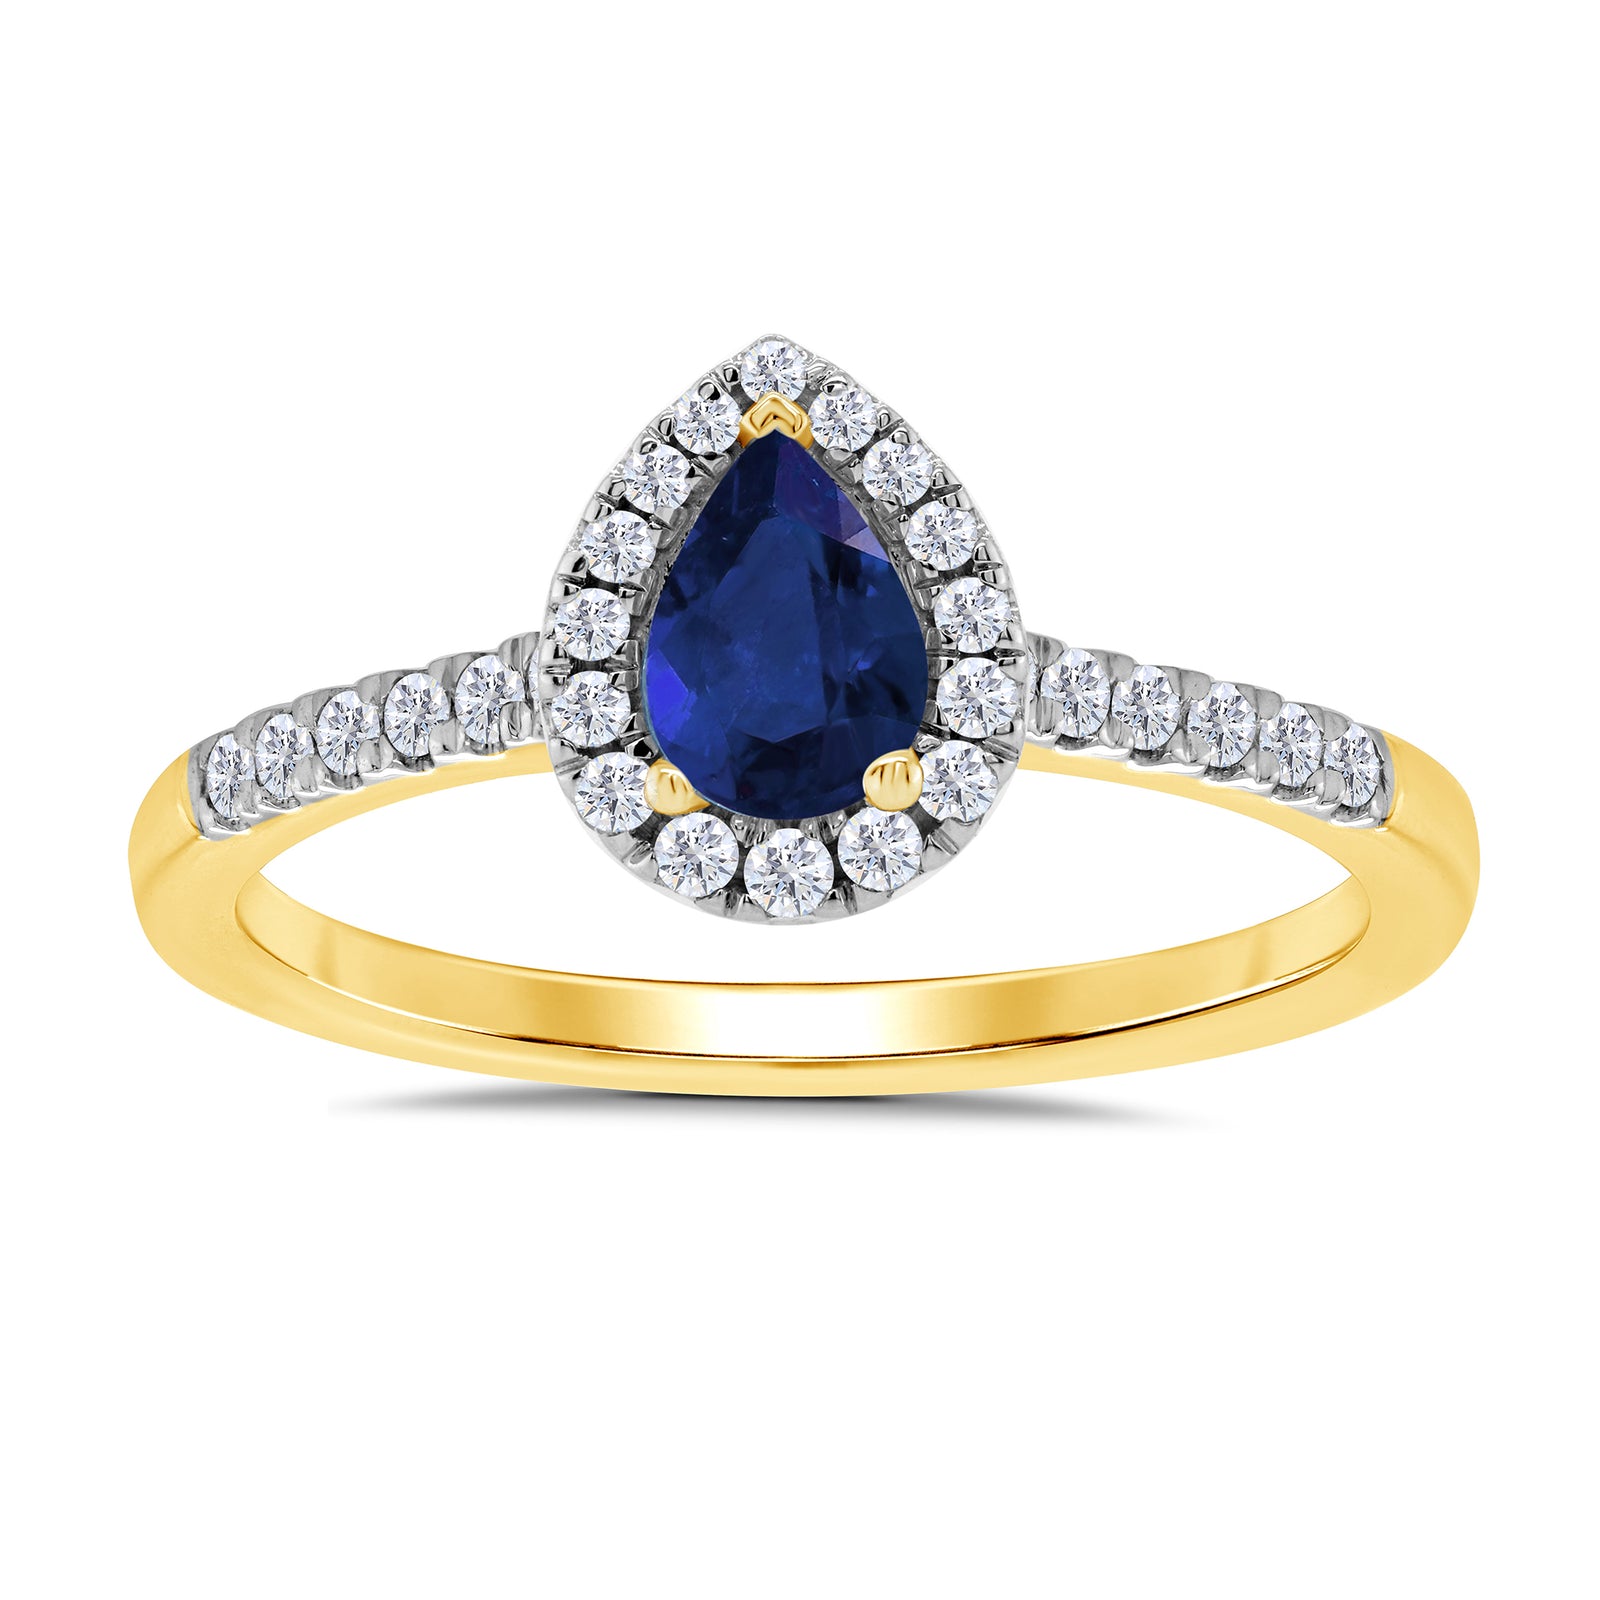 9ct gold 6x4mm pear shape sapphire & diamond cluster ring with diamond set shoulders 0.20ct